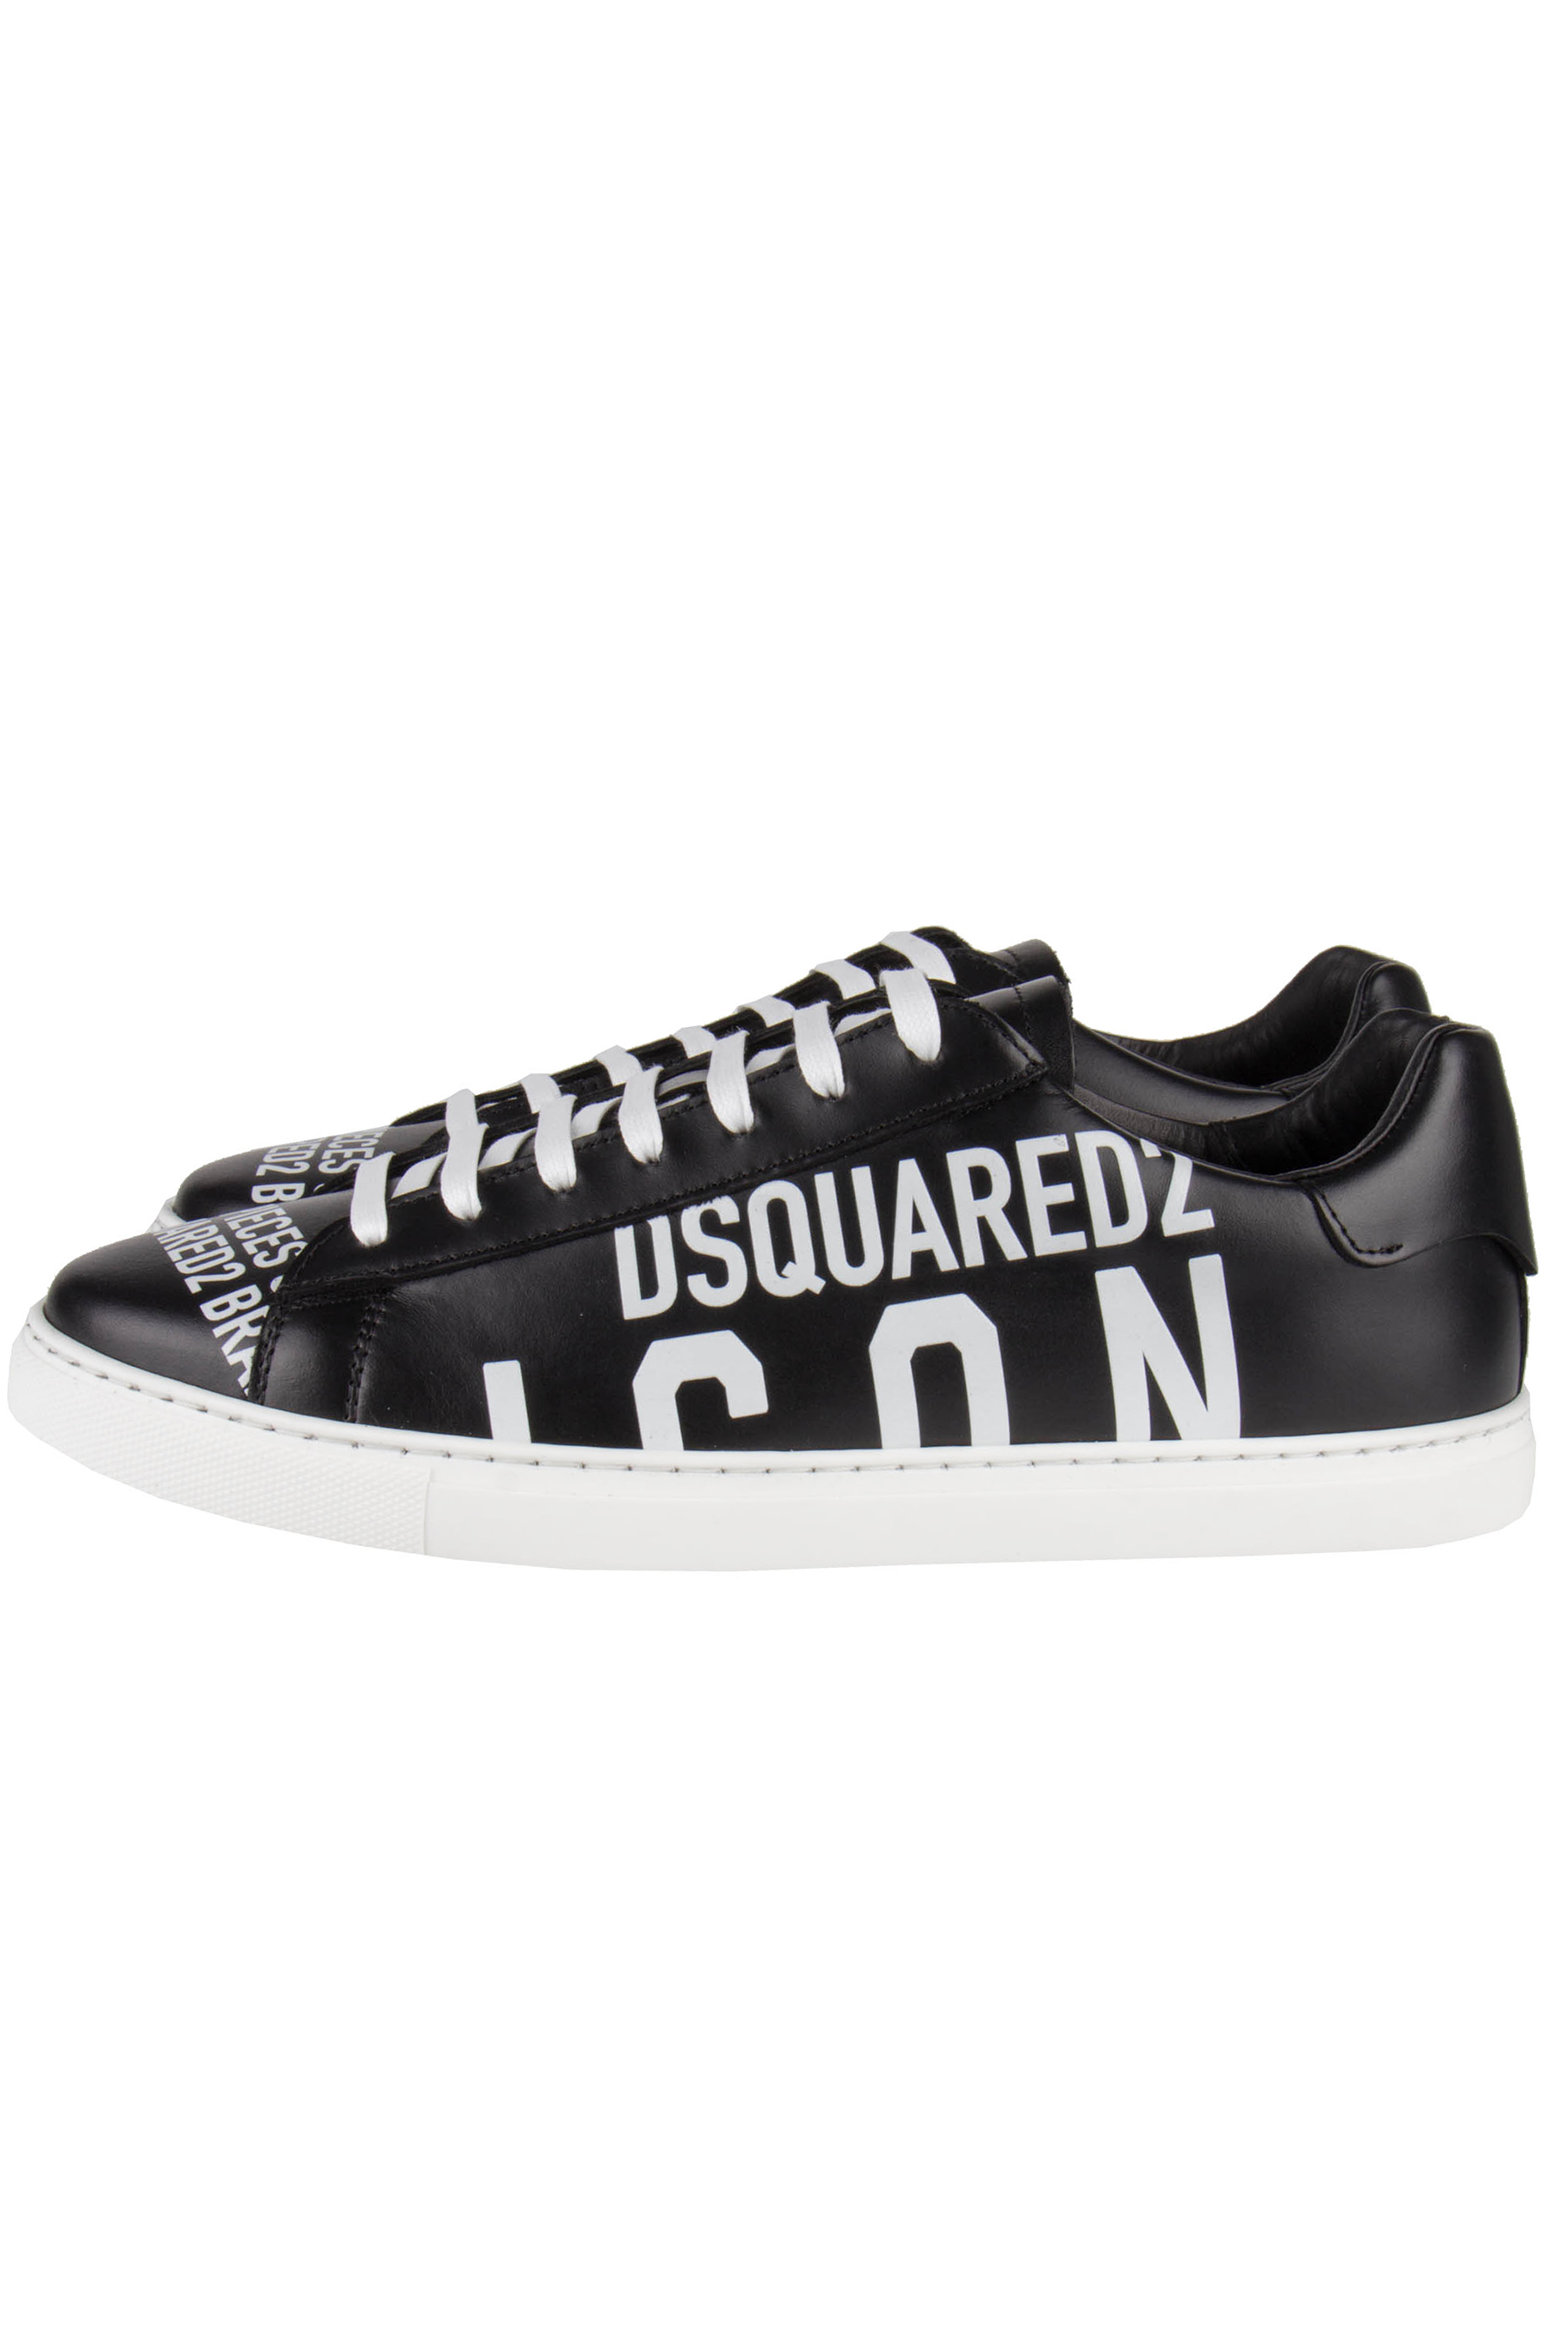 dsquared shoes